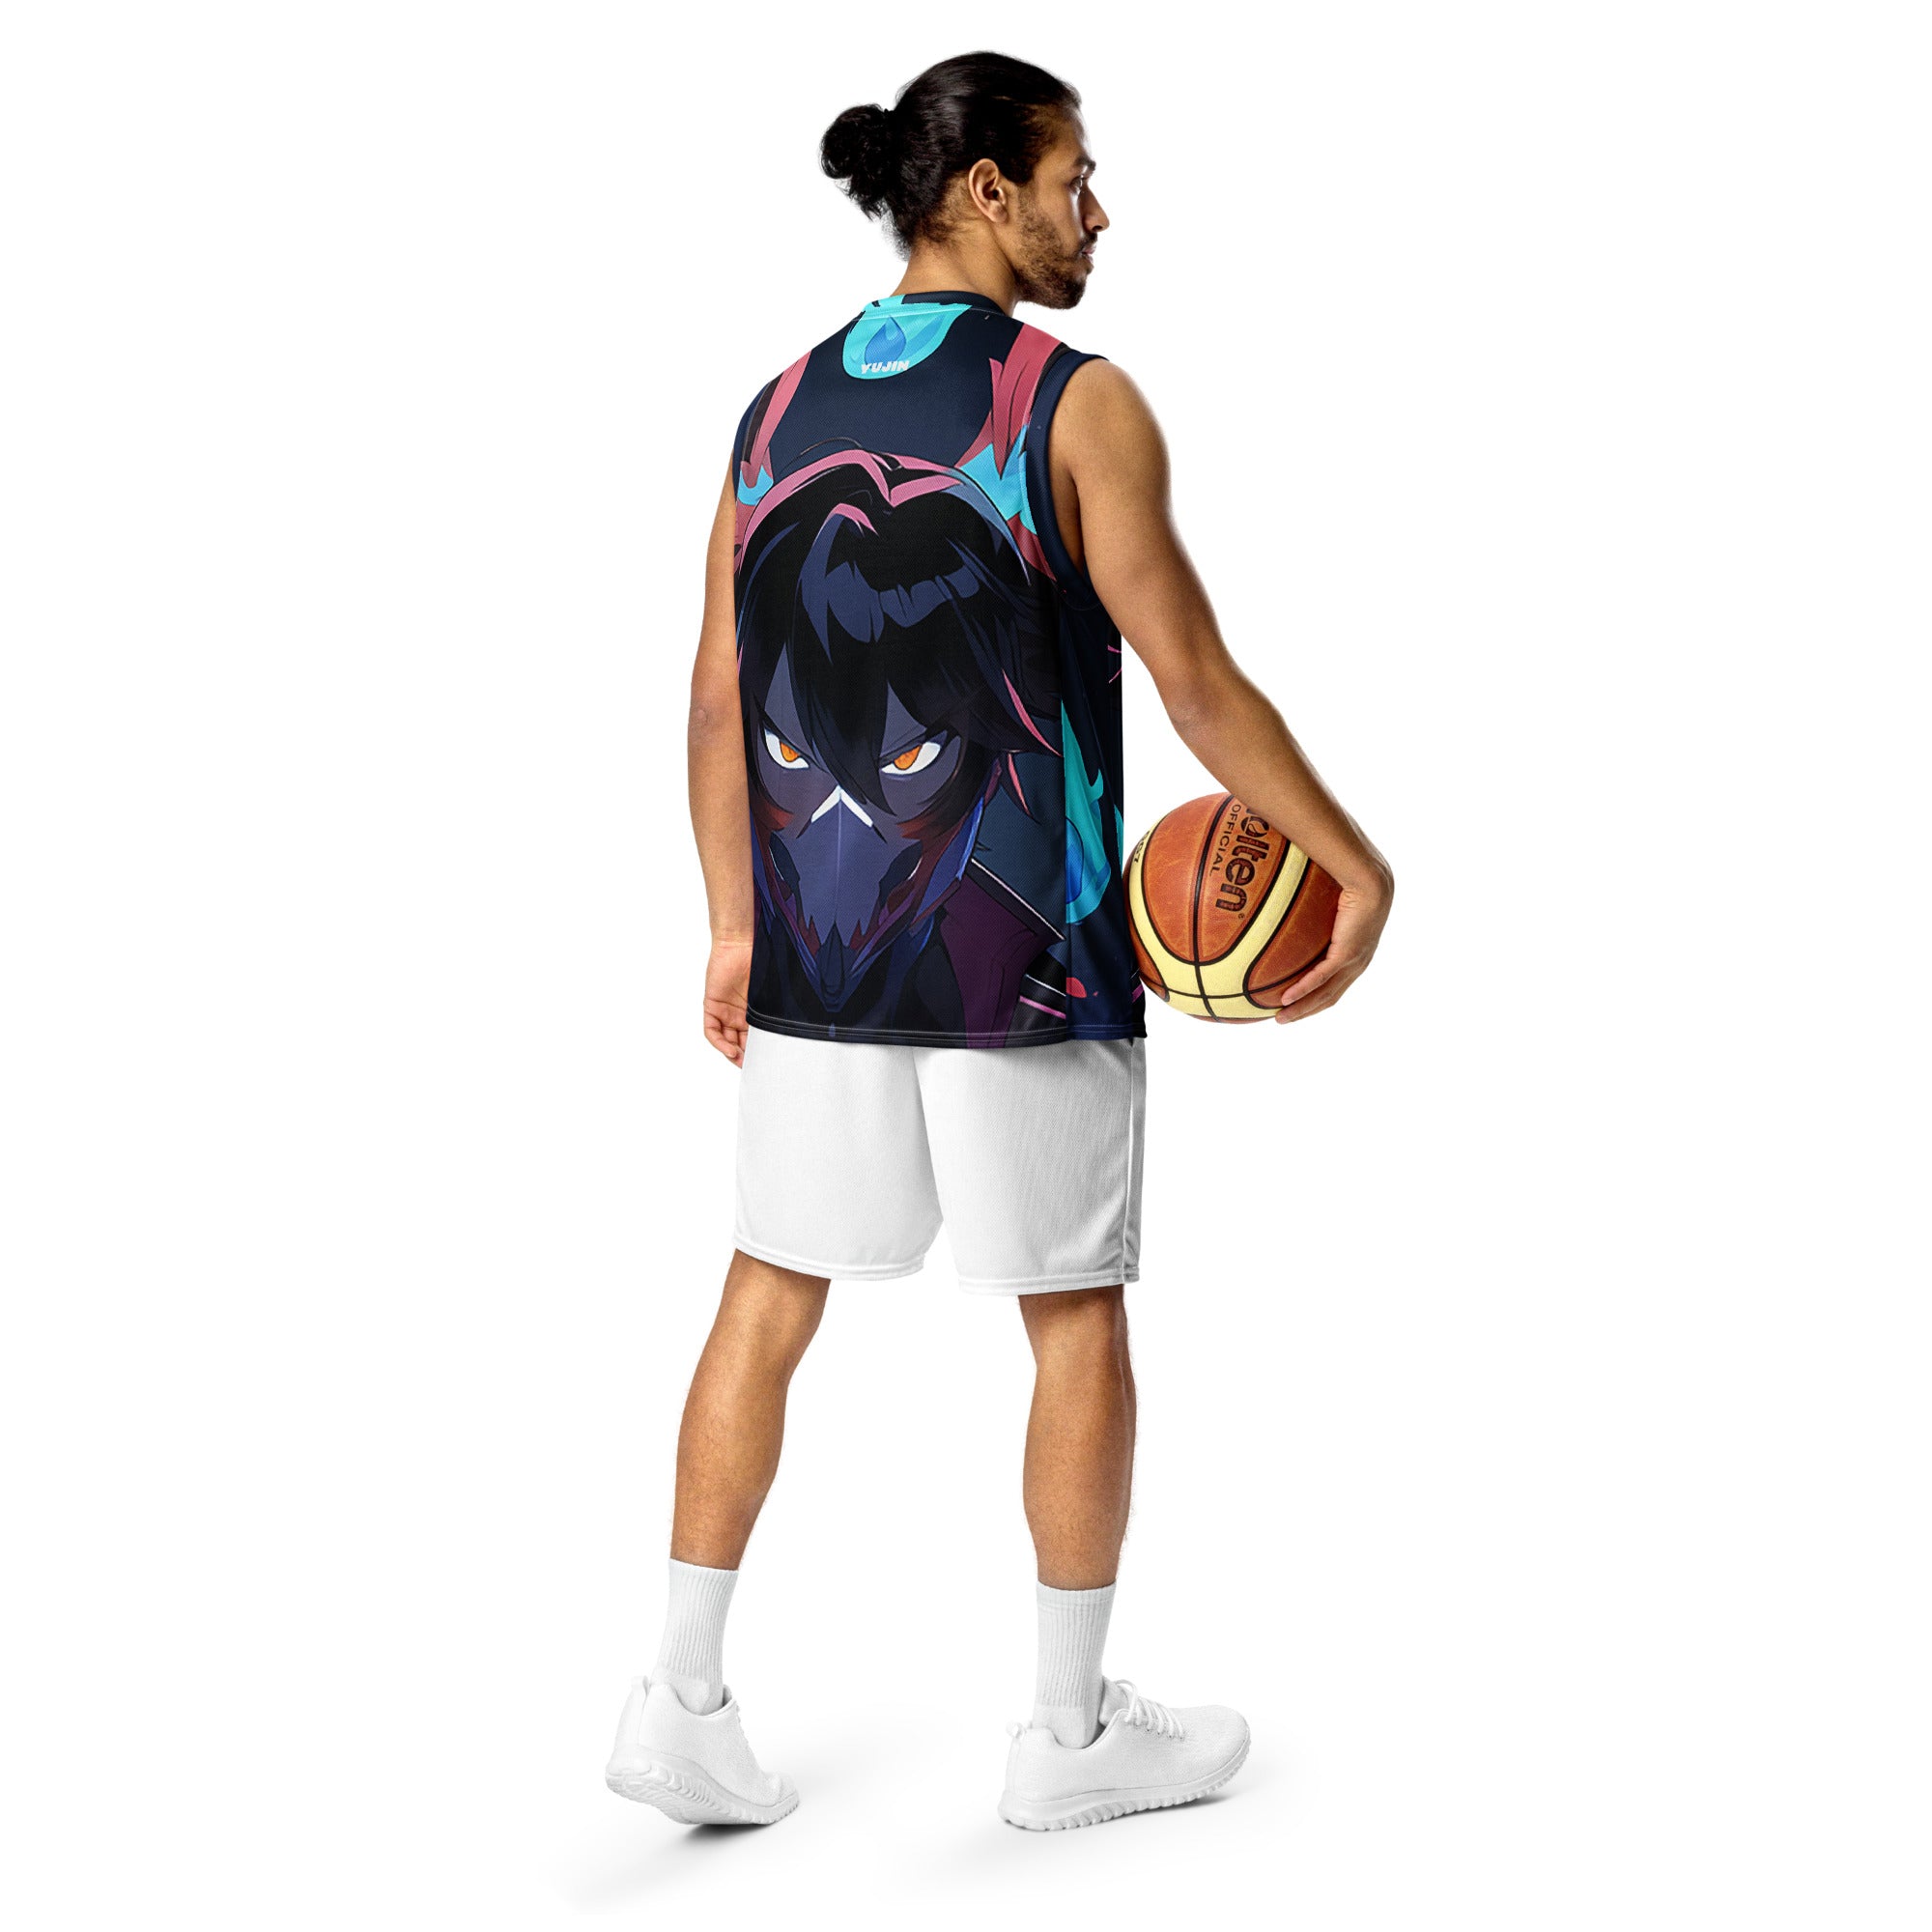 Basketball Streetwear Collection